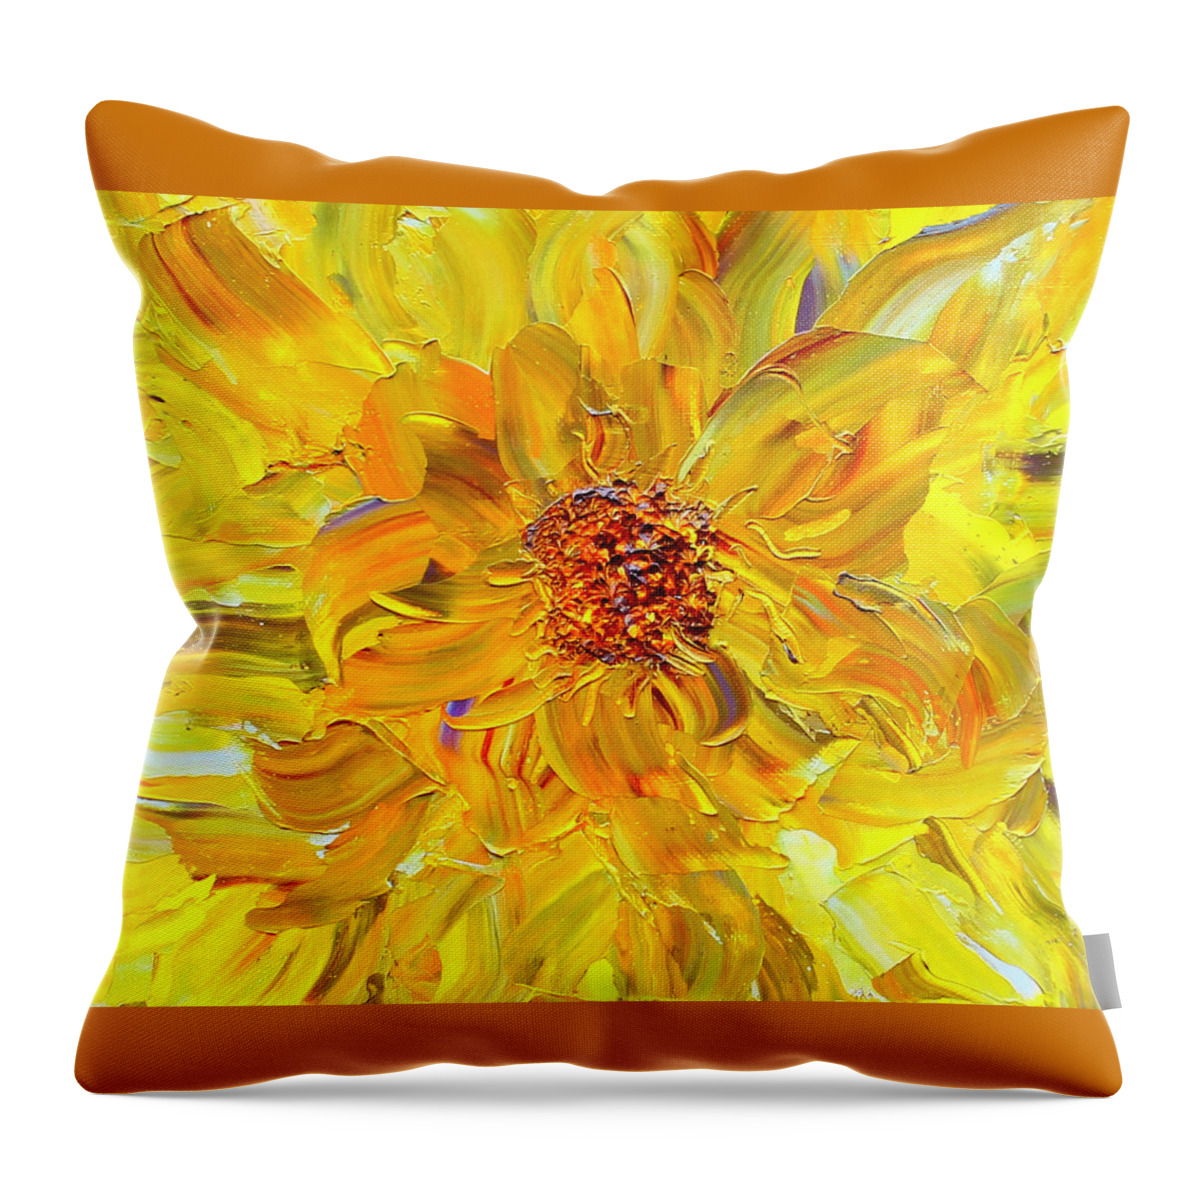 Marigold Throw Pillow featuring the painting Marigold Inspiration 2 by Teresa Moerer